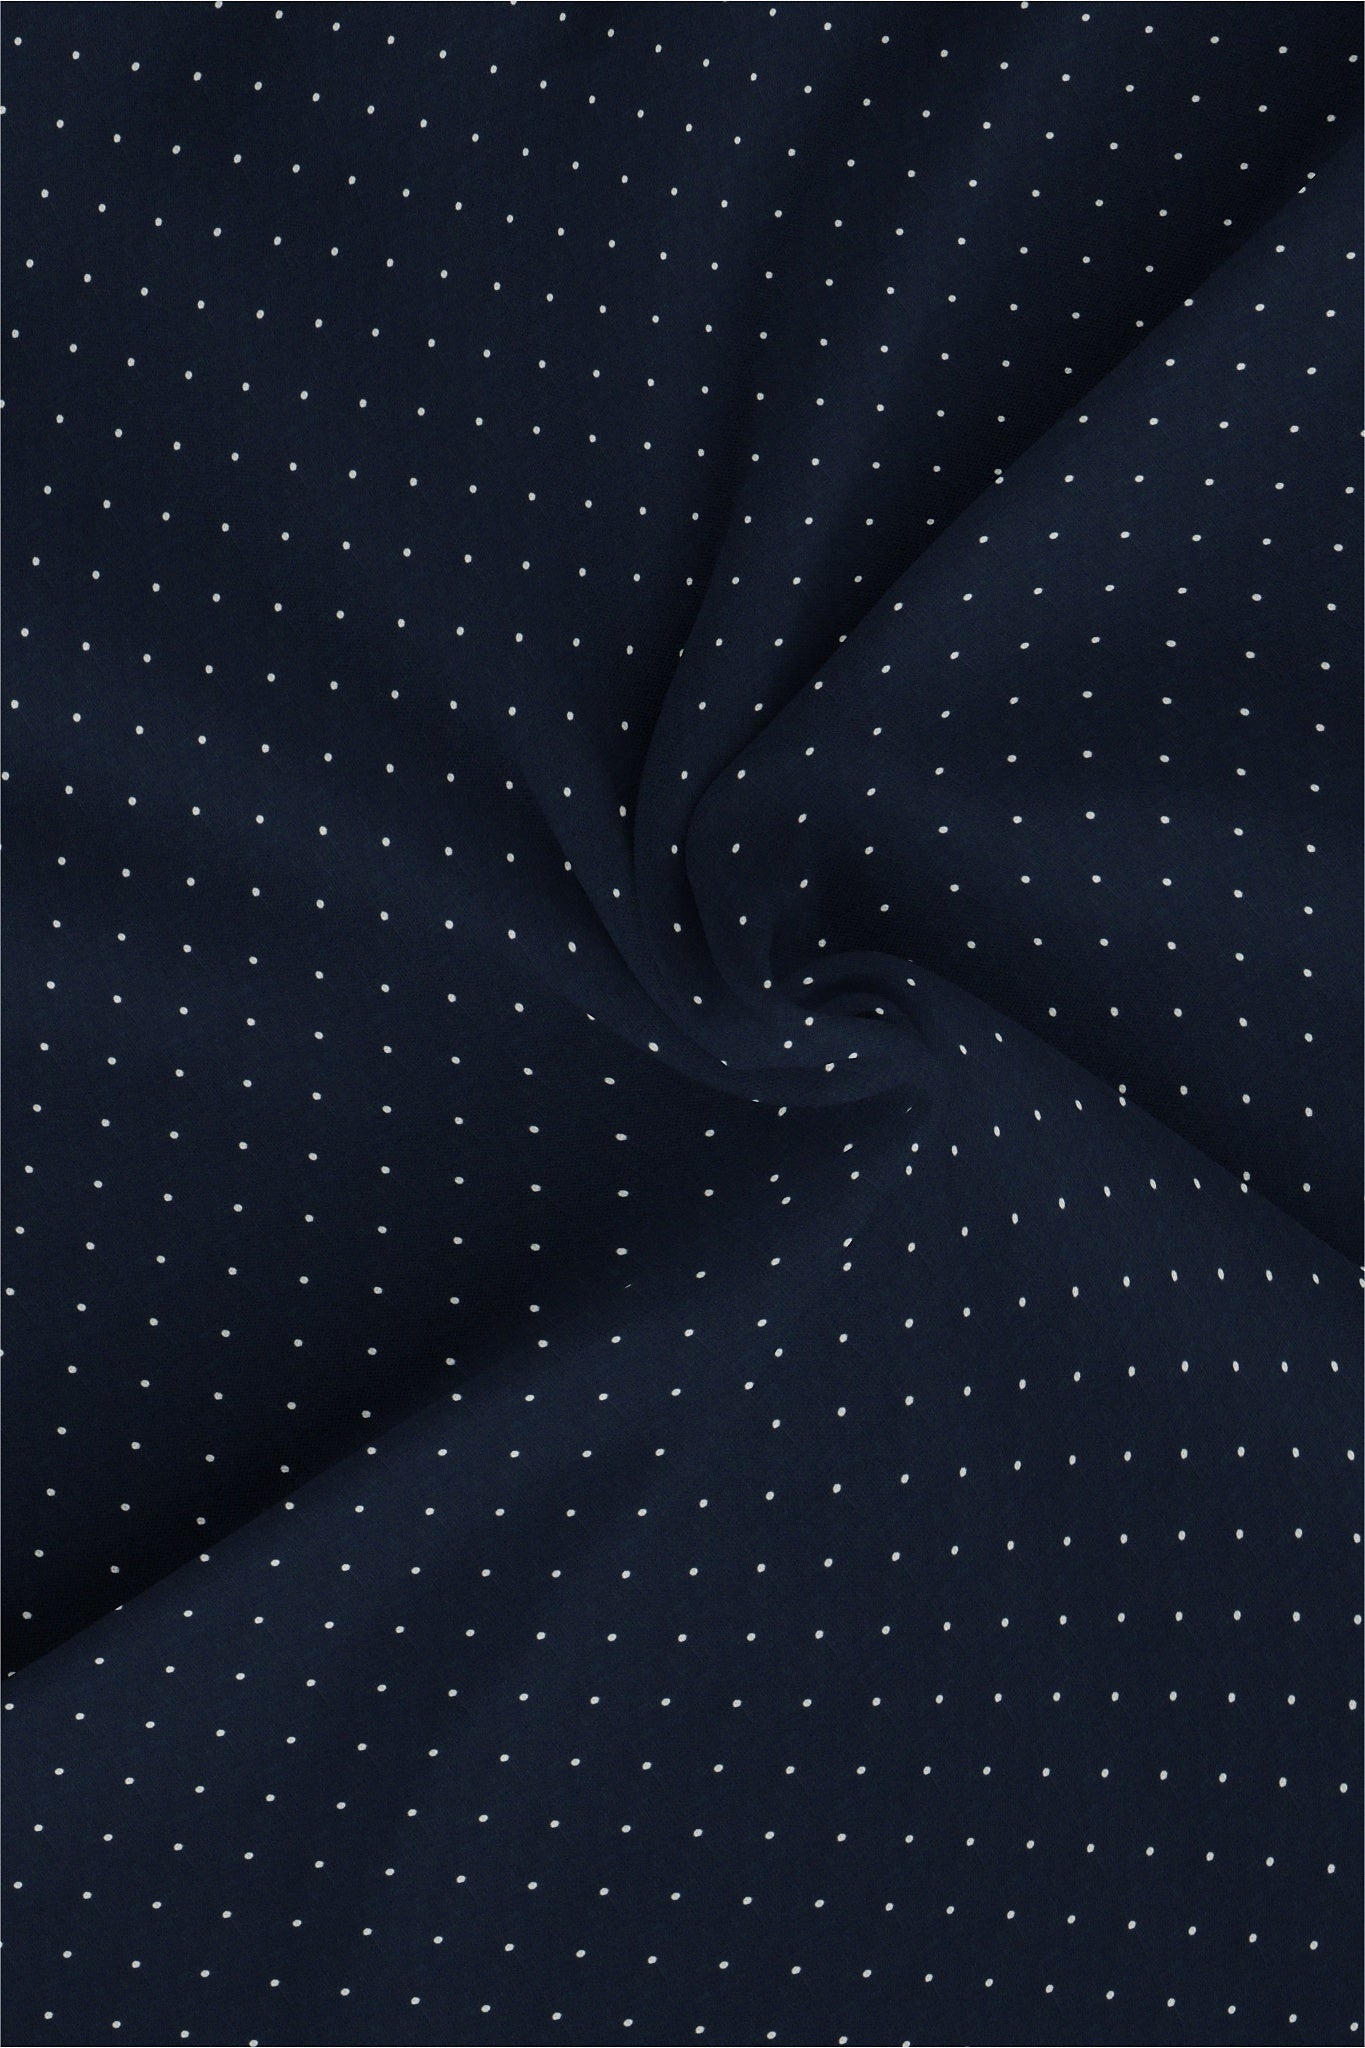 Midnight Blue with White Dotted Men's Cotton Shirt